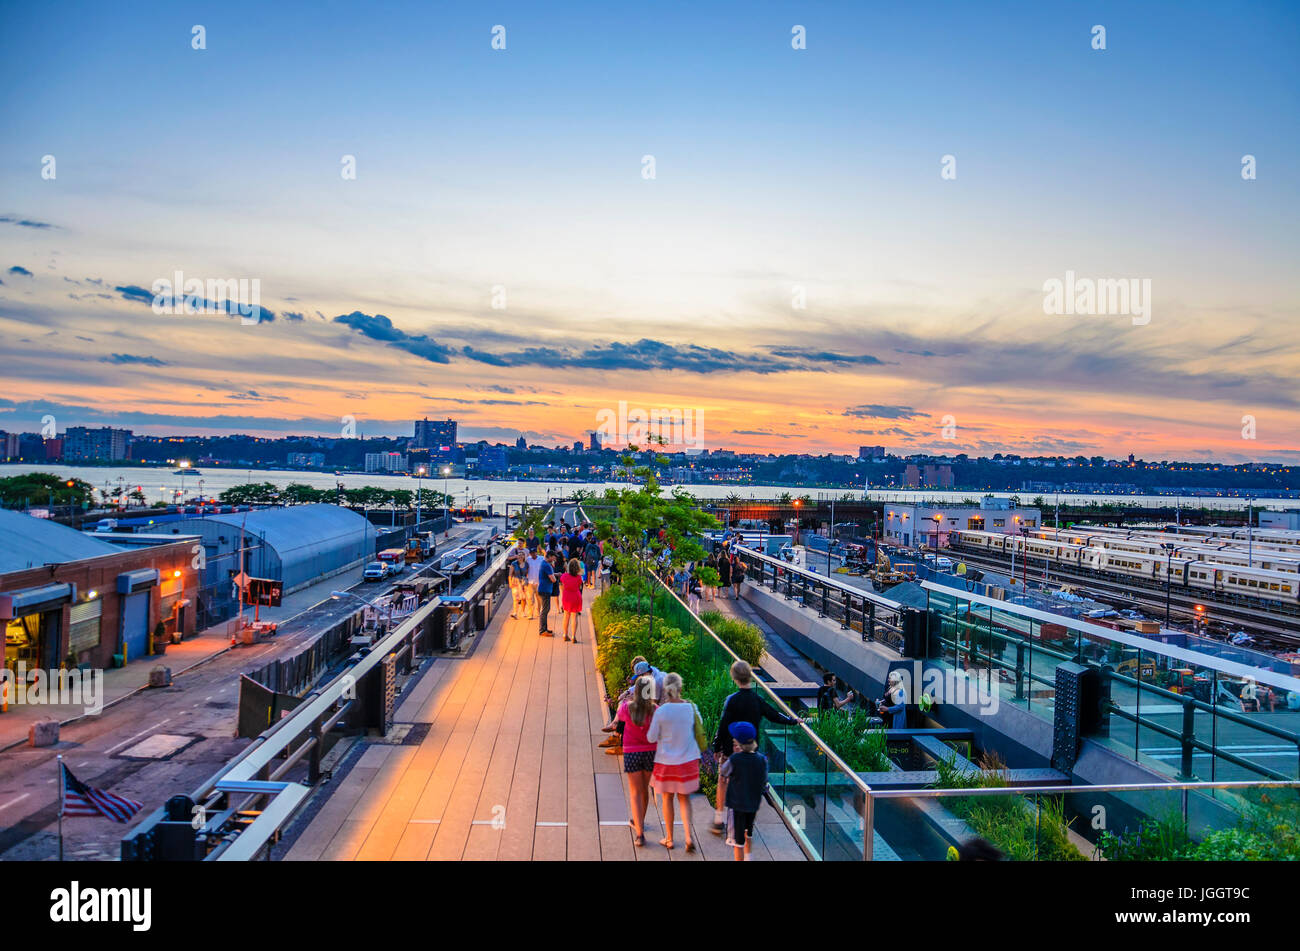 The wonderful urban view from the High Line Park in Manhattan. The High Line is a popular linear park built on the elevated train tracks. Stock Photo